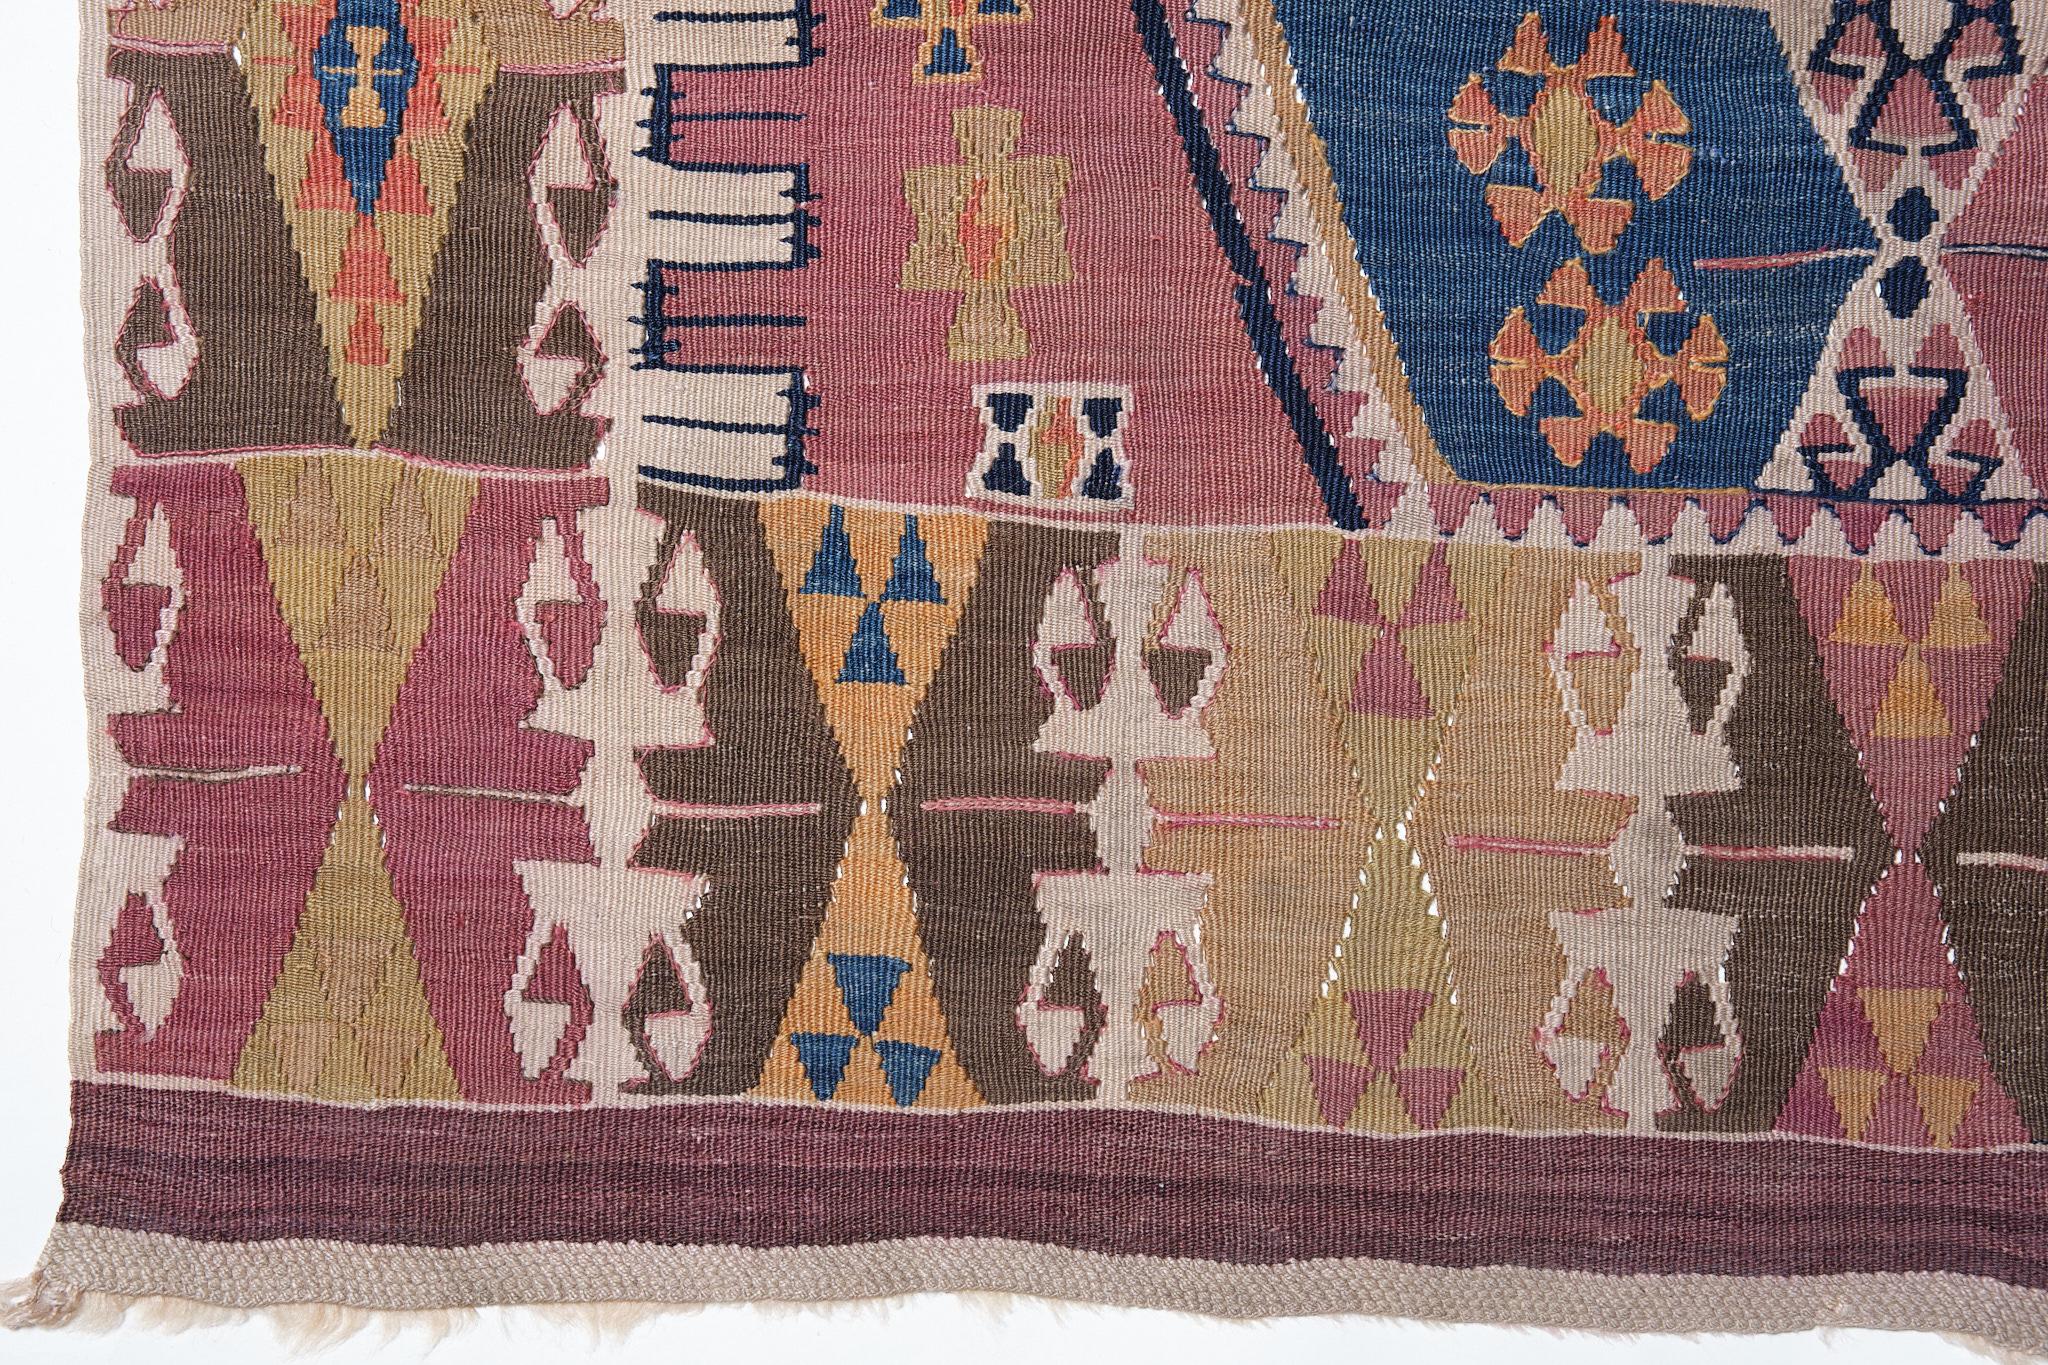 This is a Southern Anatolian Antique Kilim from the Malatya region with a rare and beautiful color composition.

Malatya is one of the leading producers of kilims in Turkey. Fertile land and high-quality wool, originally a Kurdish town, was an